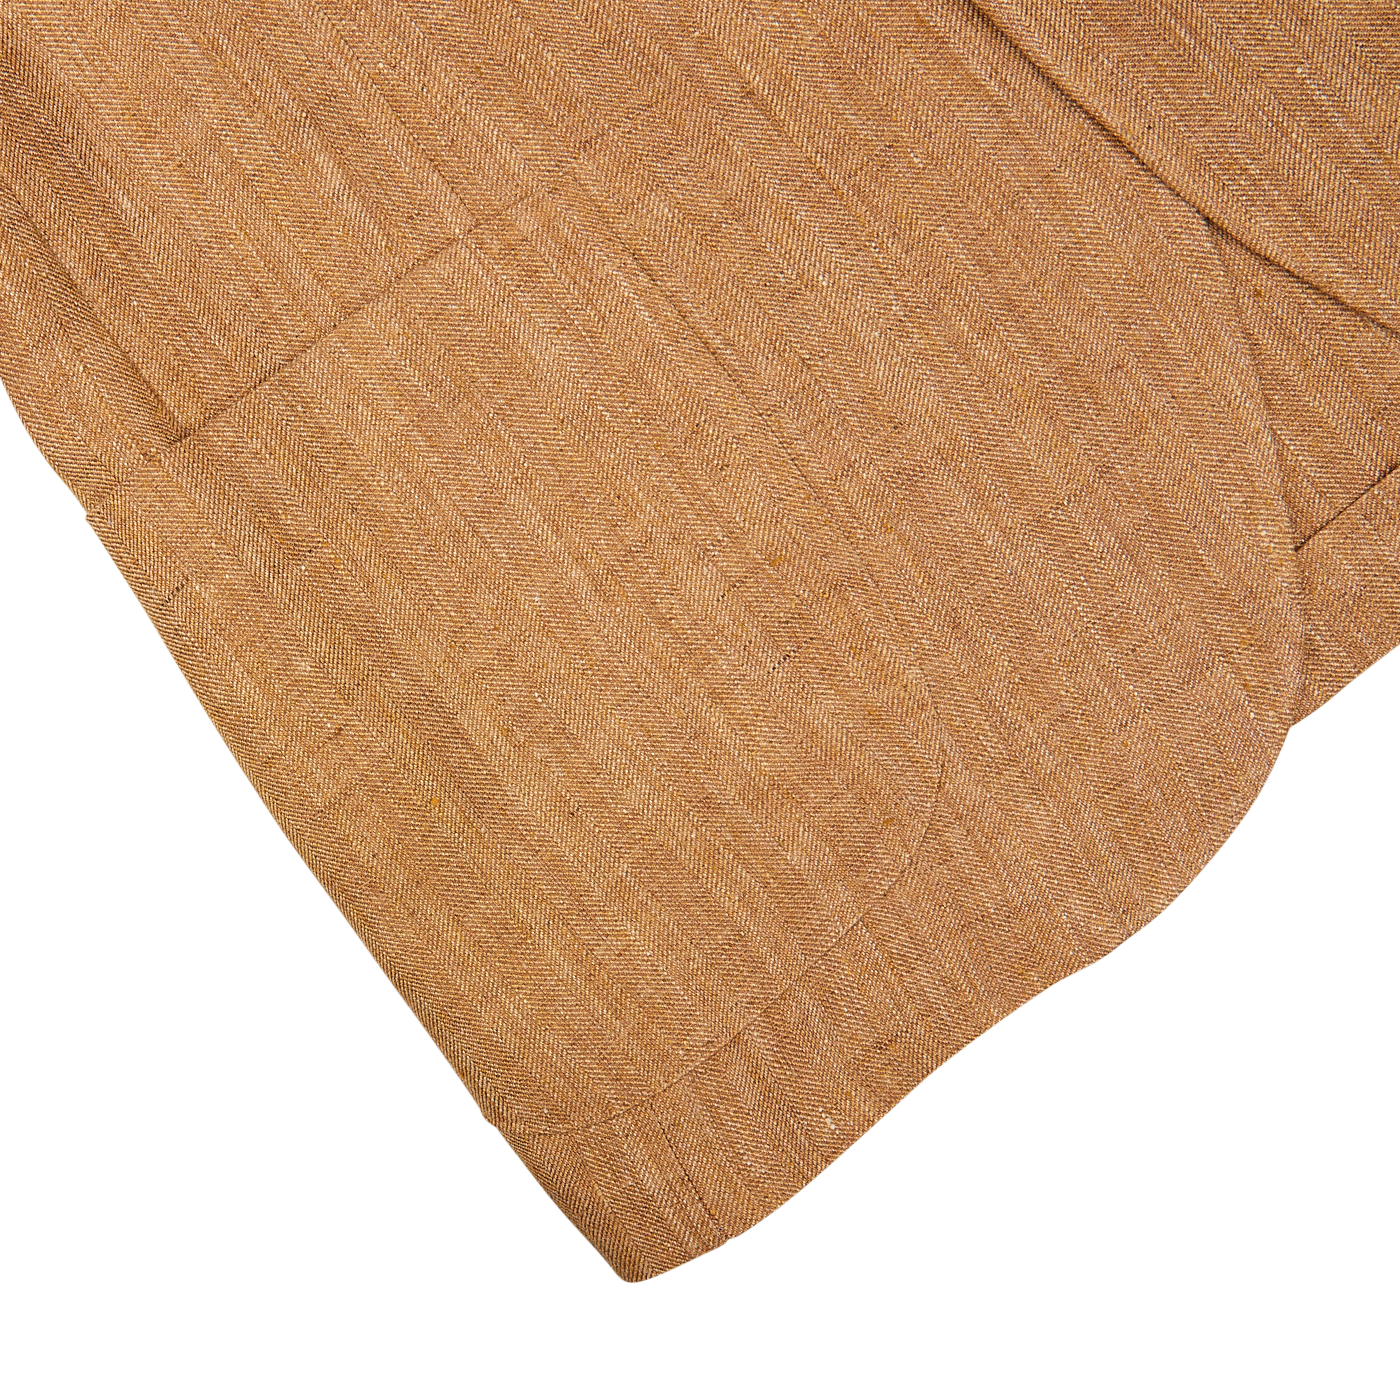 Close-up of a De Petrillo Tobacco Brown Herringbone Pure Linen Suit with folded edges on a white background.